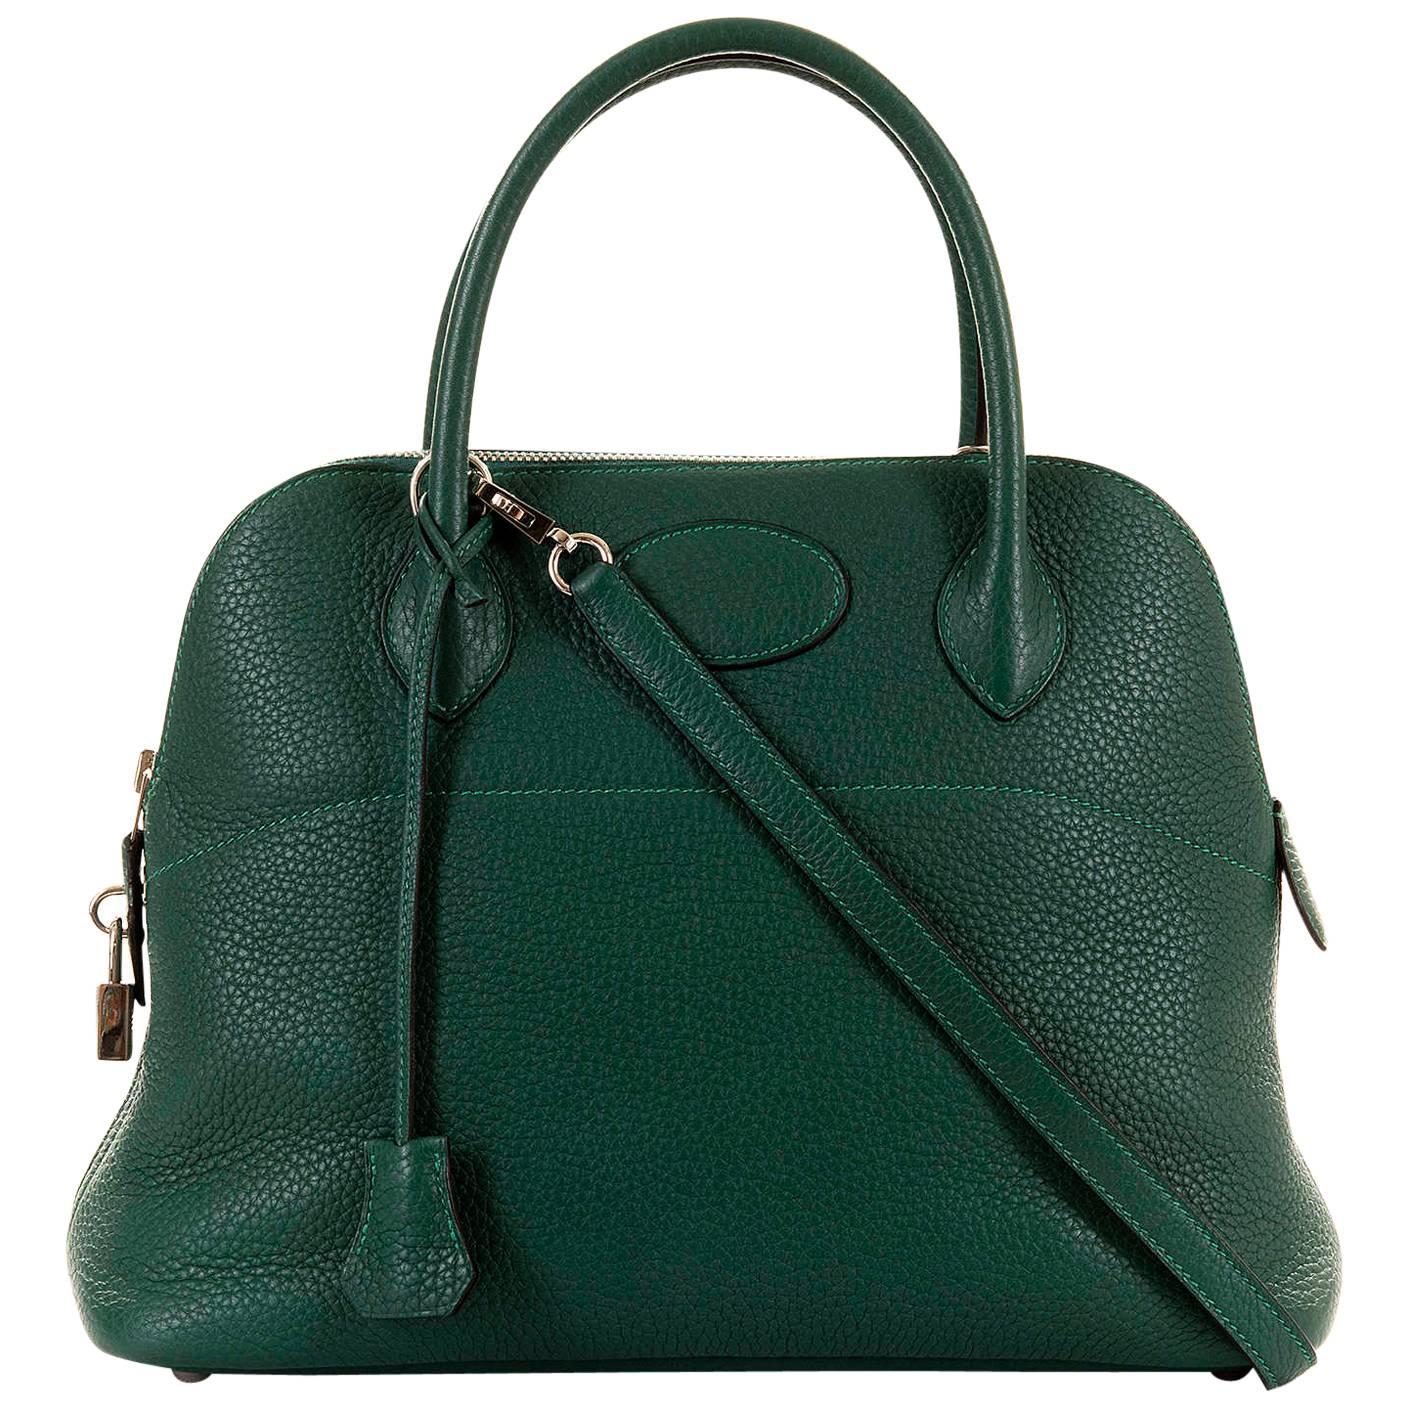 WOW! As New Hermes 31cm Rare 'Malachite Green' Togo Leather Bolide Bag with SHW For Sale